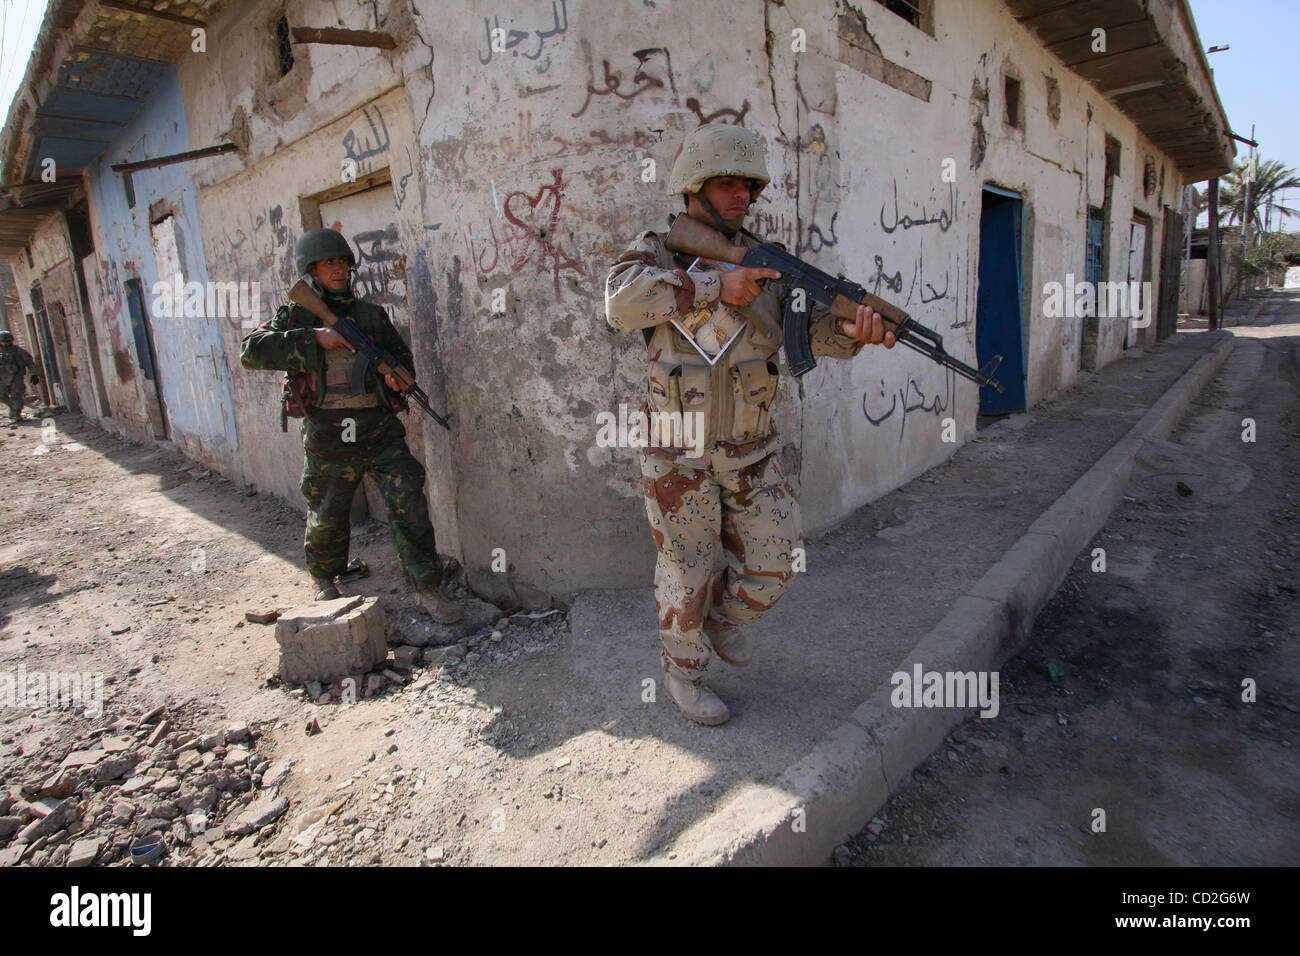 Mar 03, 2008 - Dora District, Baghdad, Iraq - Soldiers of the Iraqi Army conducting a joint patrol with the US Army in the Dora District of Baghdad. (Credit Image: © Simon Klingert/ZUMA Press) RESTRICTIONS: * Germany Rights OUT * Stock Photo